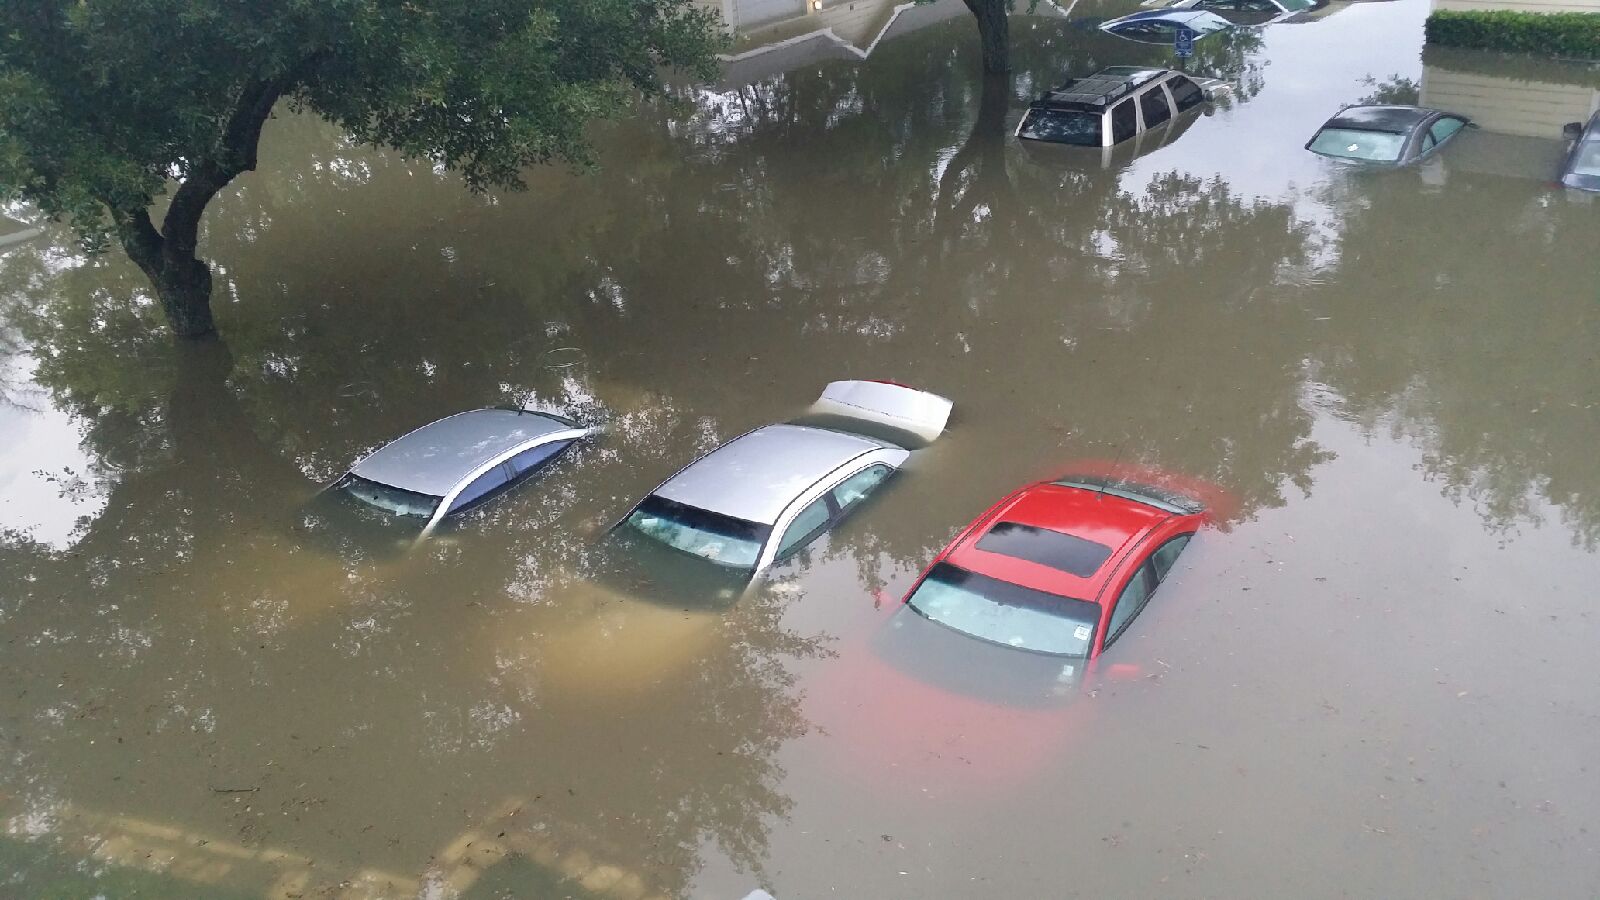 My car is flooded, now what?